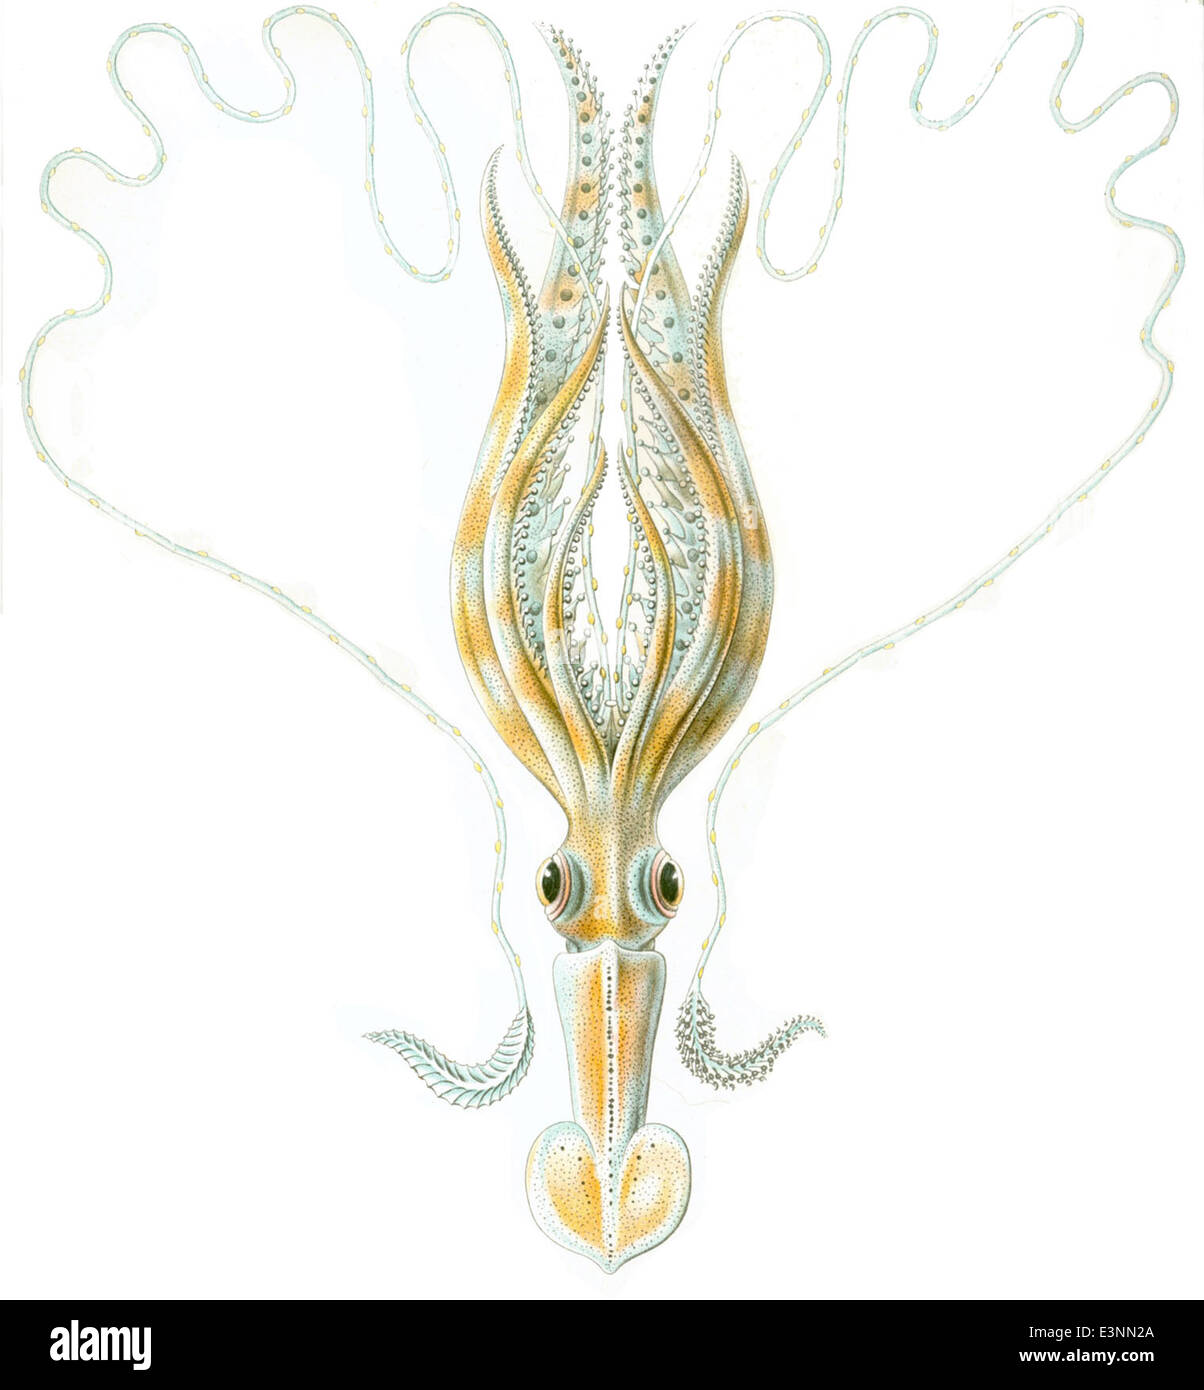 Haeckel Chiroteuthis veranyi Banque D'Images